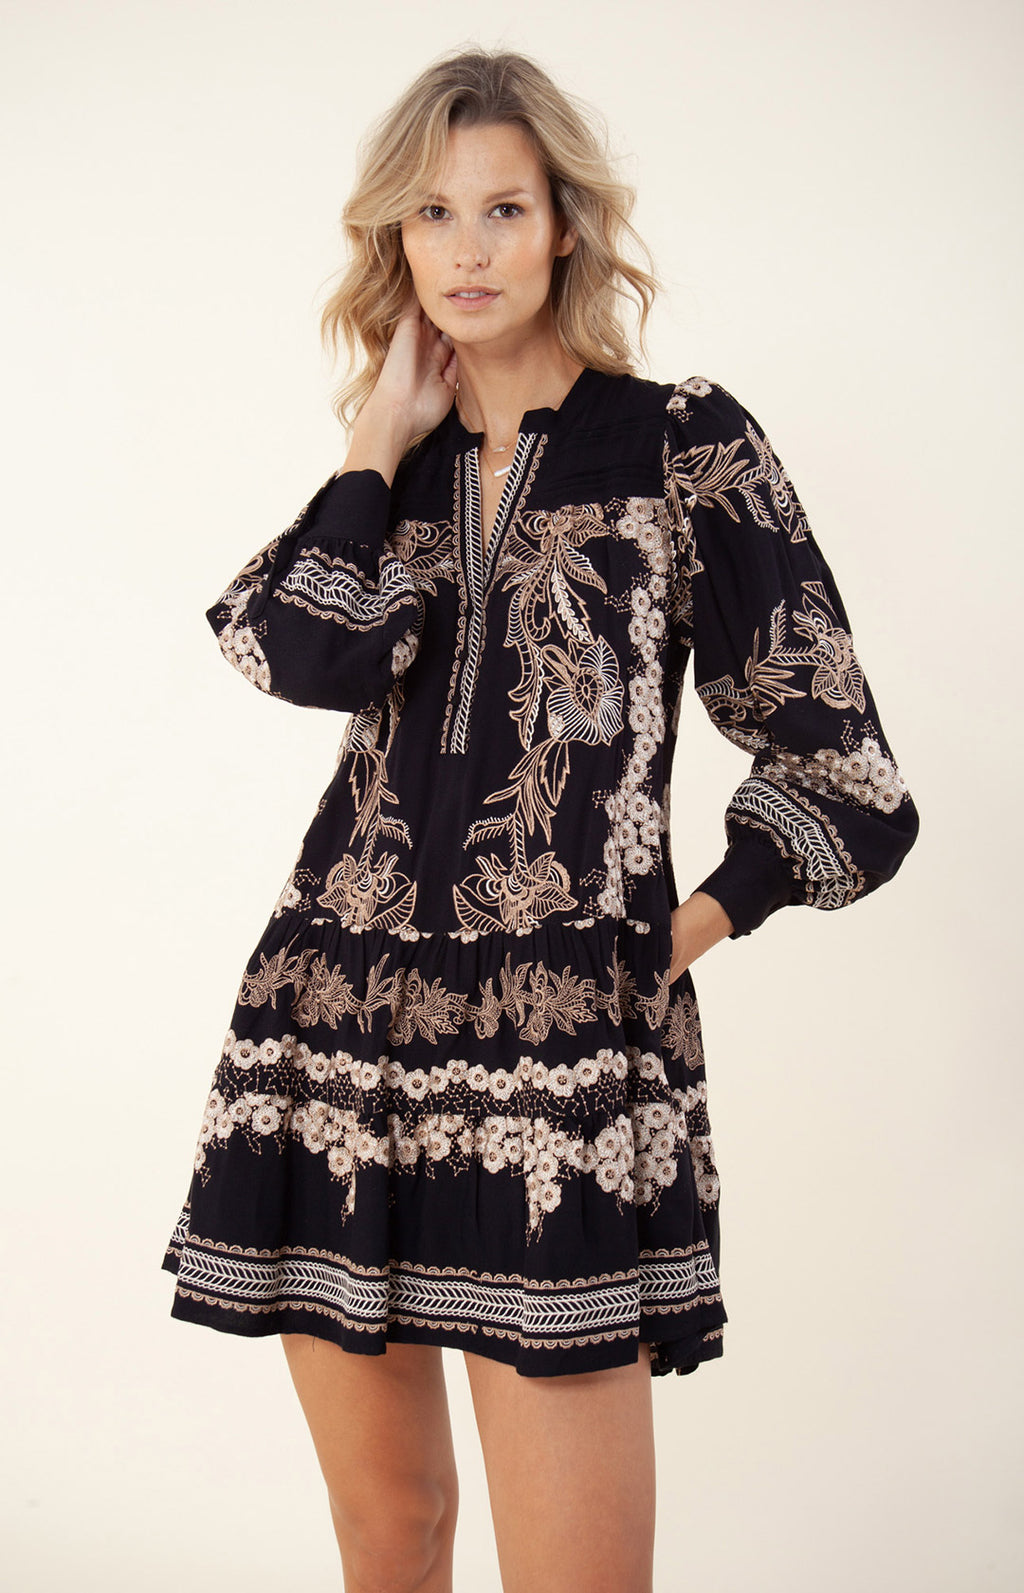 Velvet by Graham & Spencer One-Shoulder Floral Mini Dress  Anthropologie  Singapore - Women's Clothing, Accessories & Home